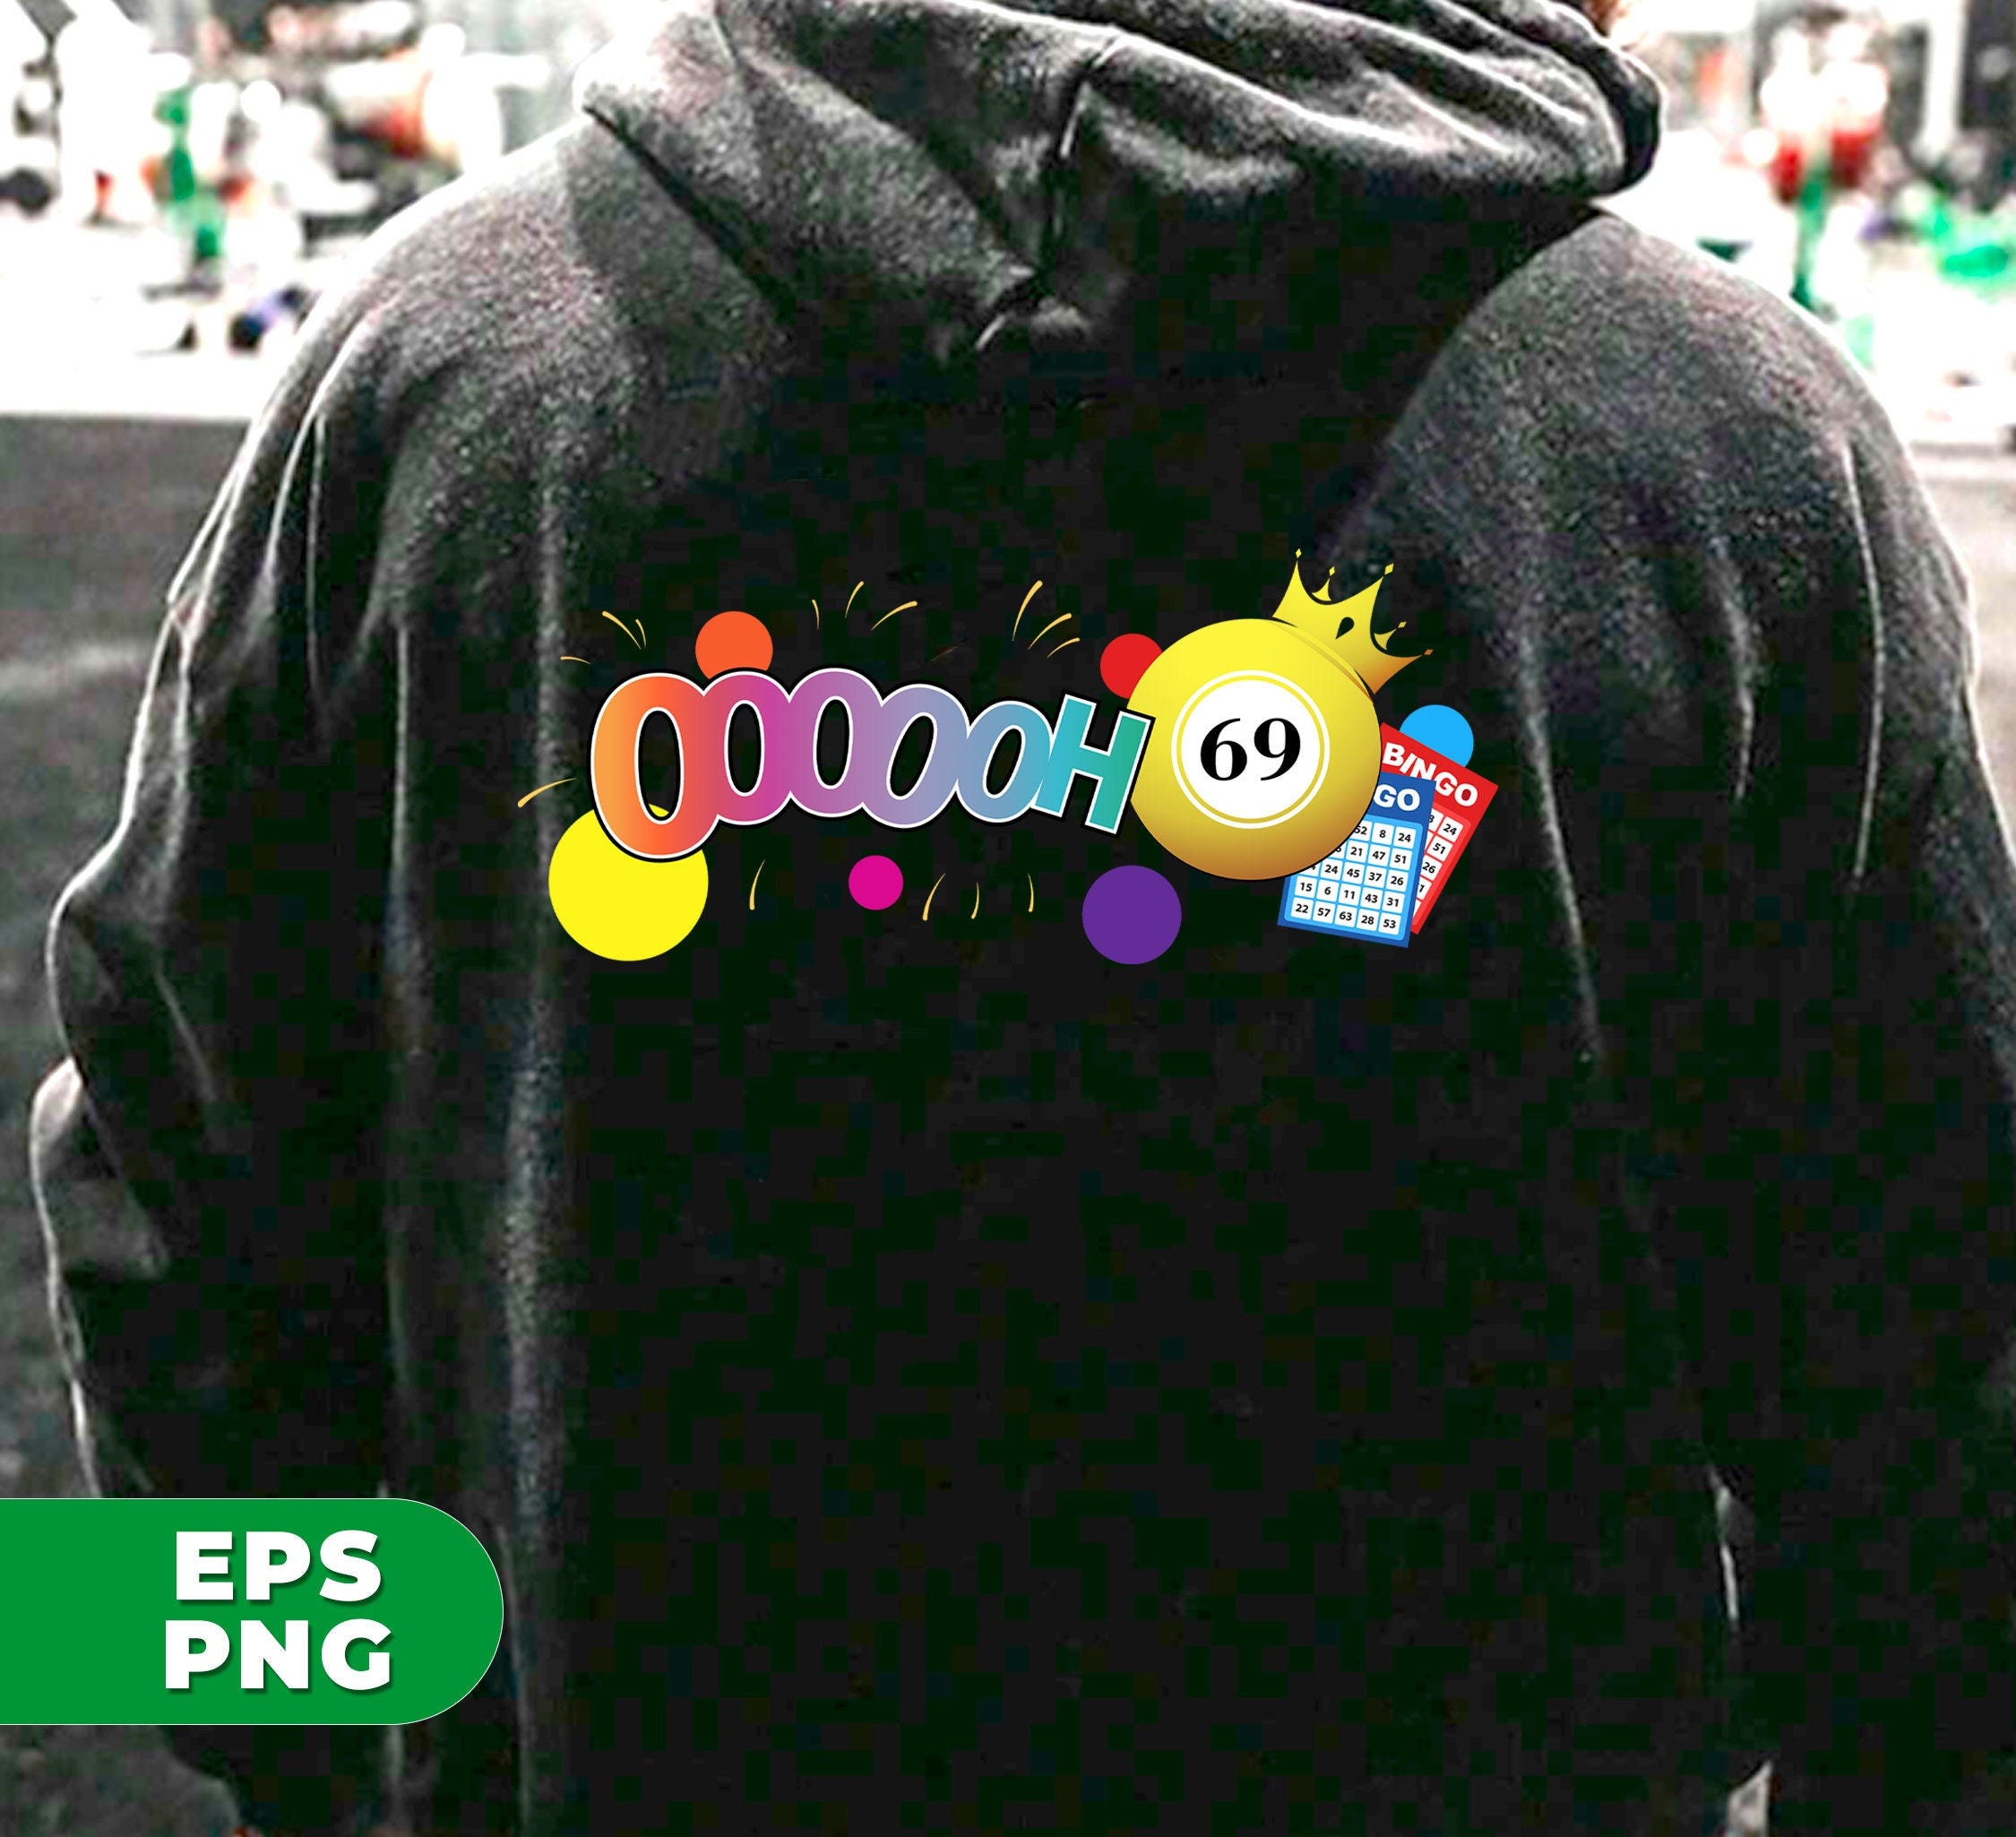 Bingo Png, Lucky Game Png, Bet Game Png, Bingo Gamer Png, Bingo Shirts, Bingo Png Files, Bingo Png Files, PNG For Shirts, PNG Sublimation